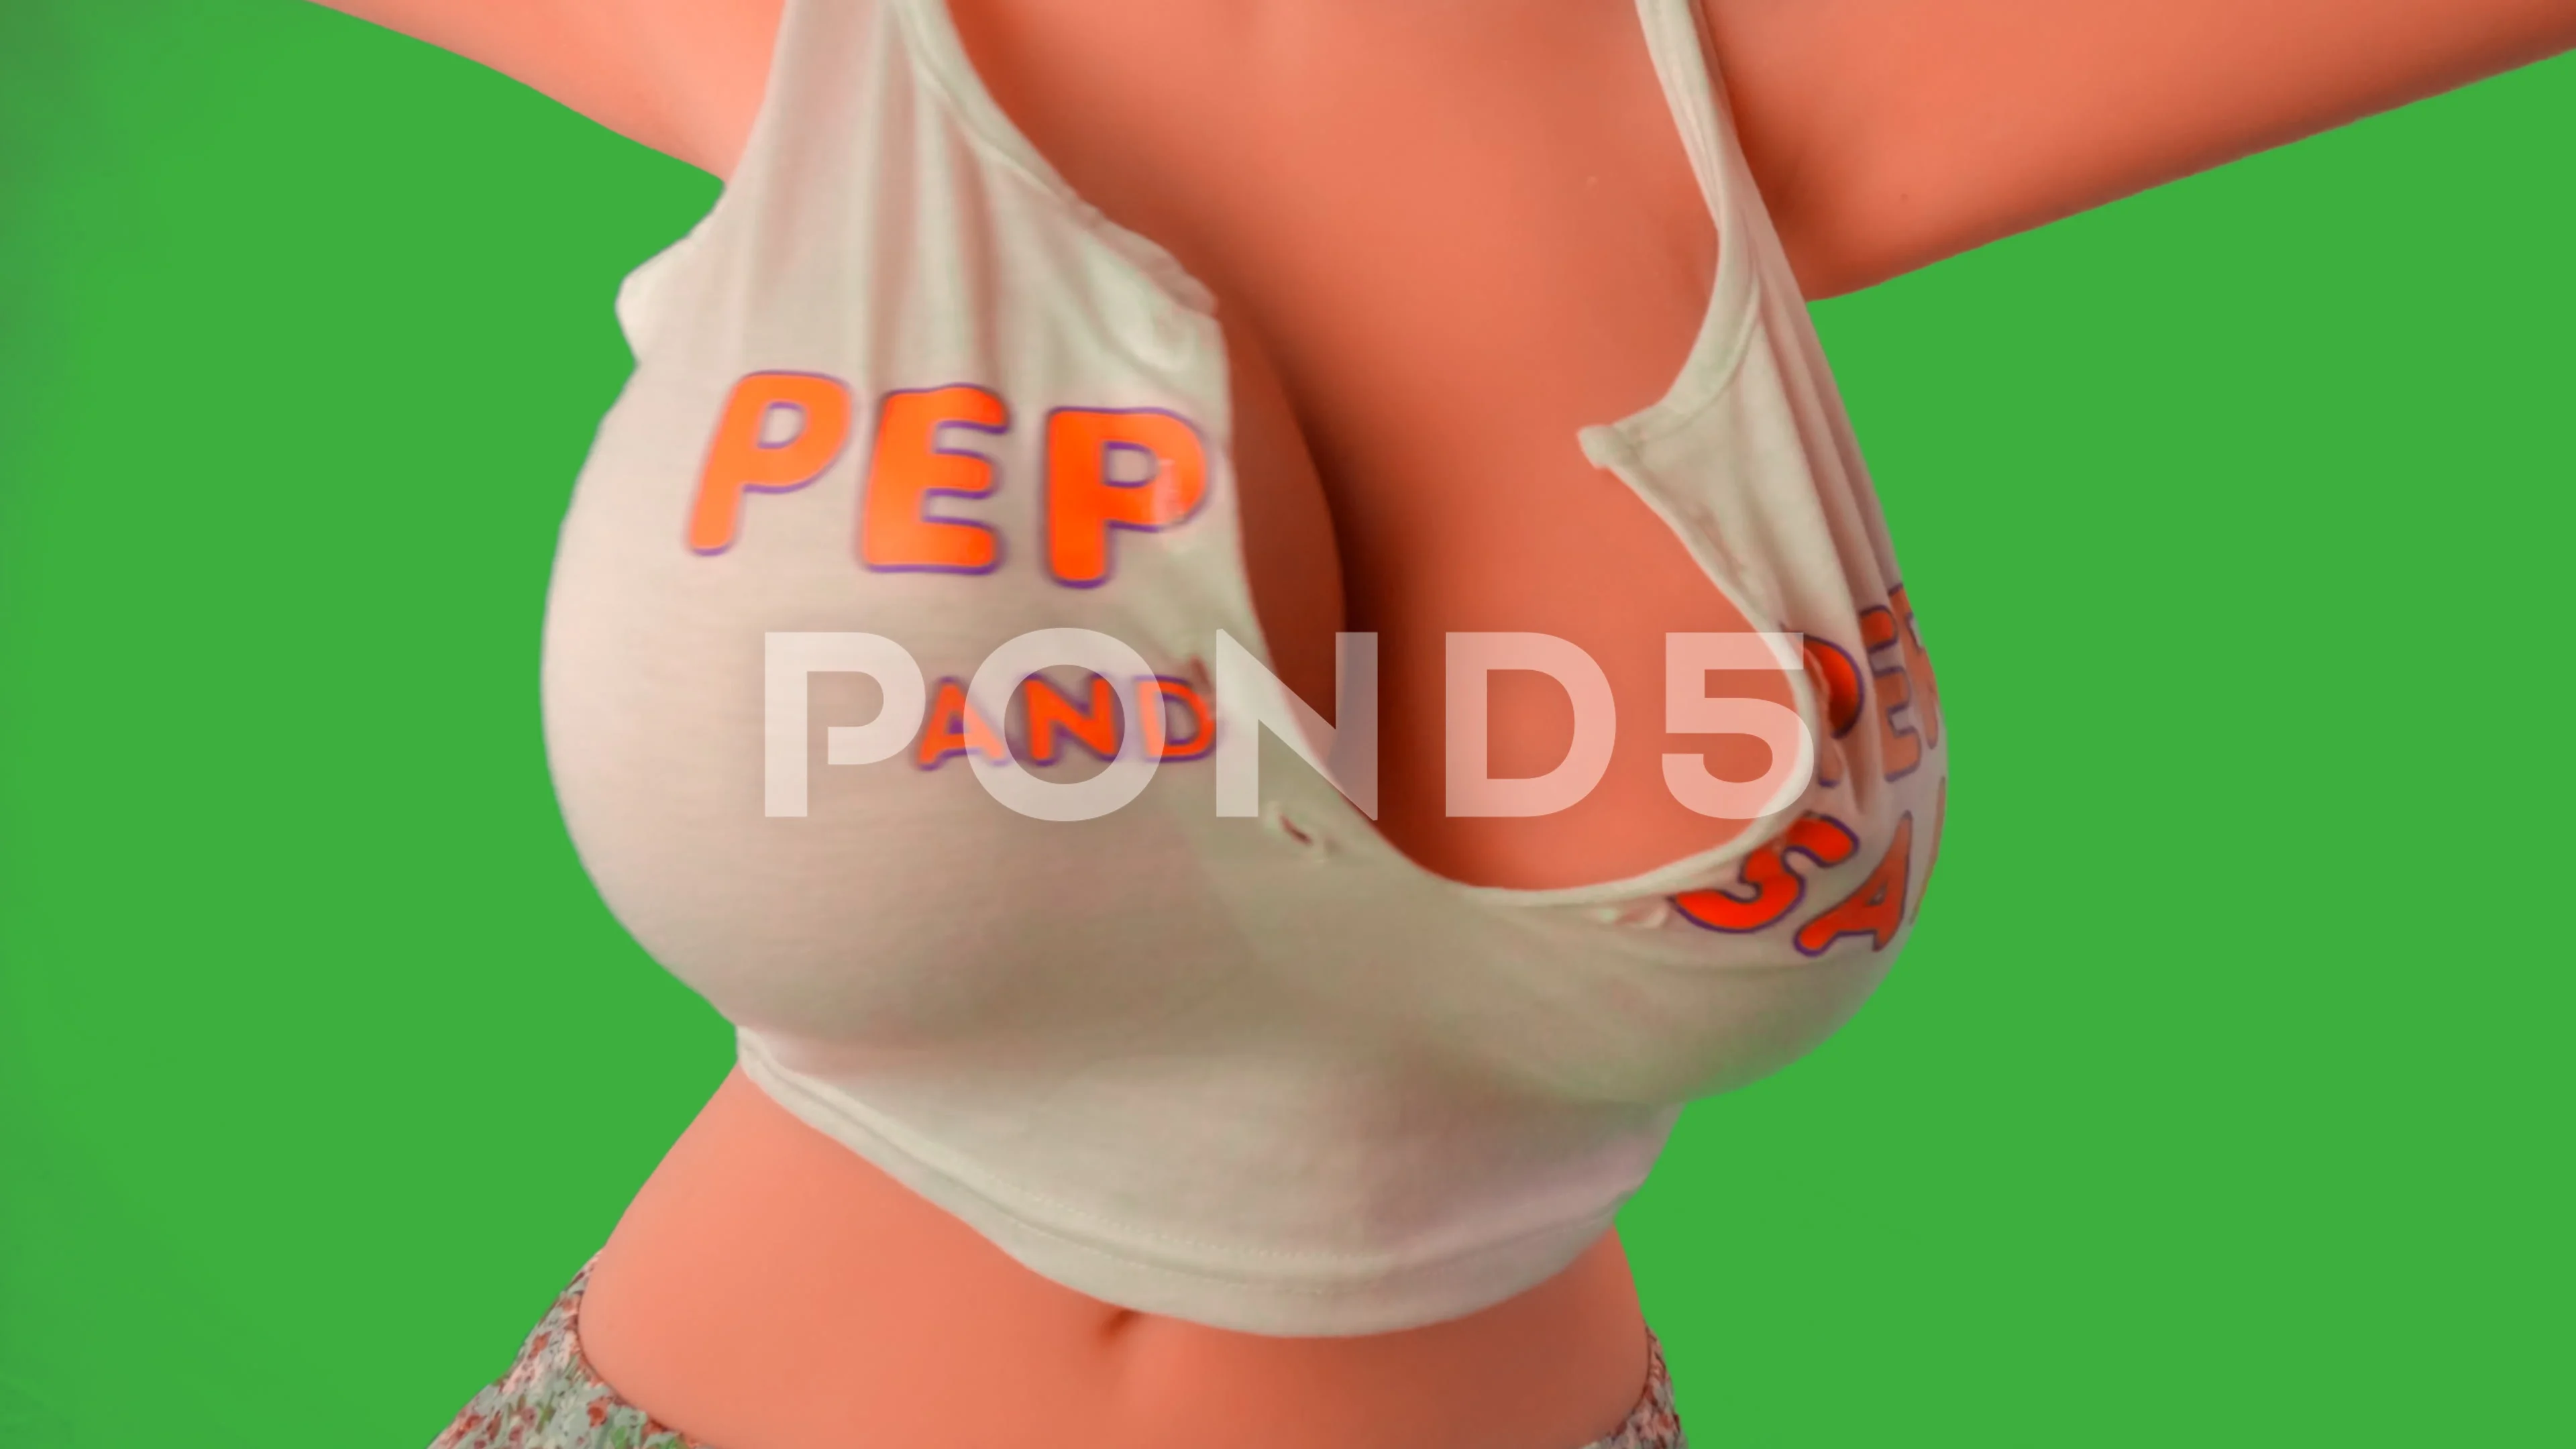 https://images.pond5.com/sexy-woman-shaking-big-breasts-footage-242389074_prevstill.jpeg